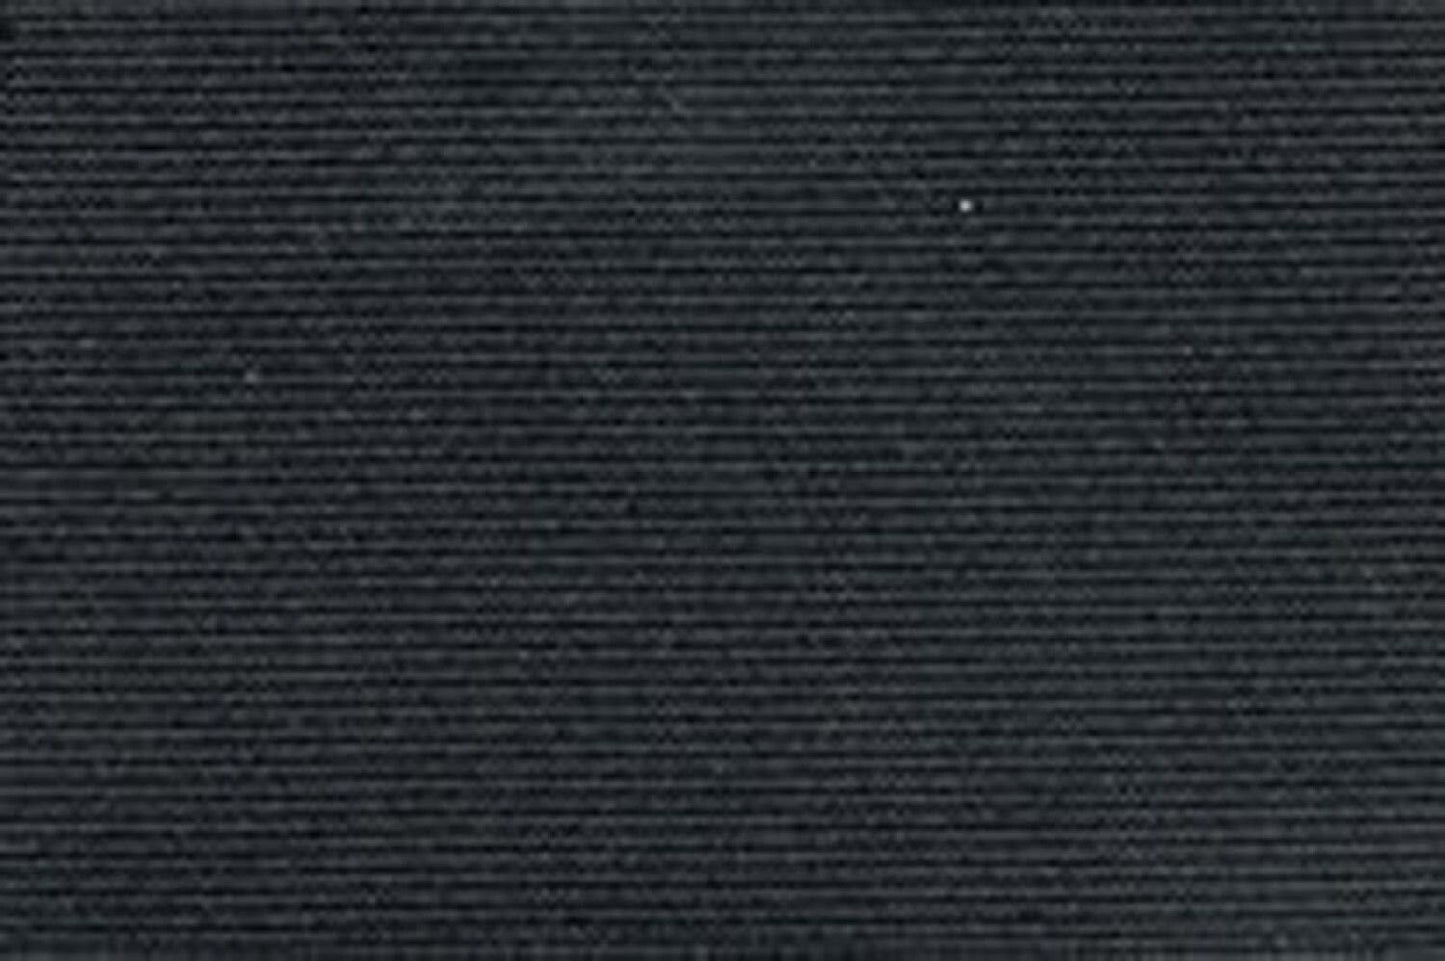 3 Inch Elastic Belting Black 28606-1 Sold by the yard